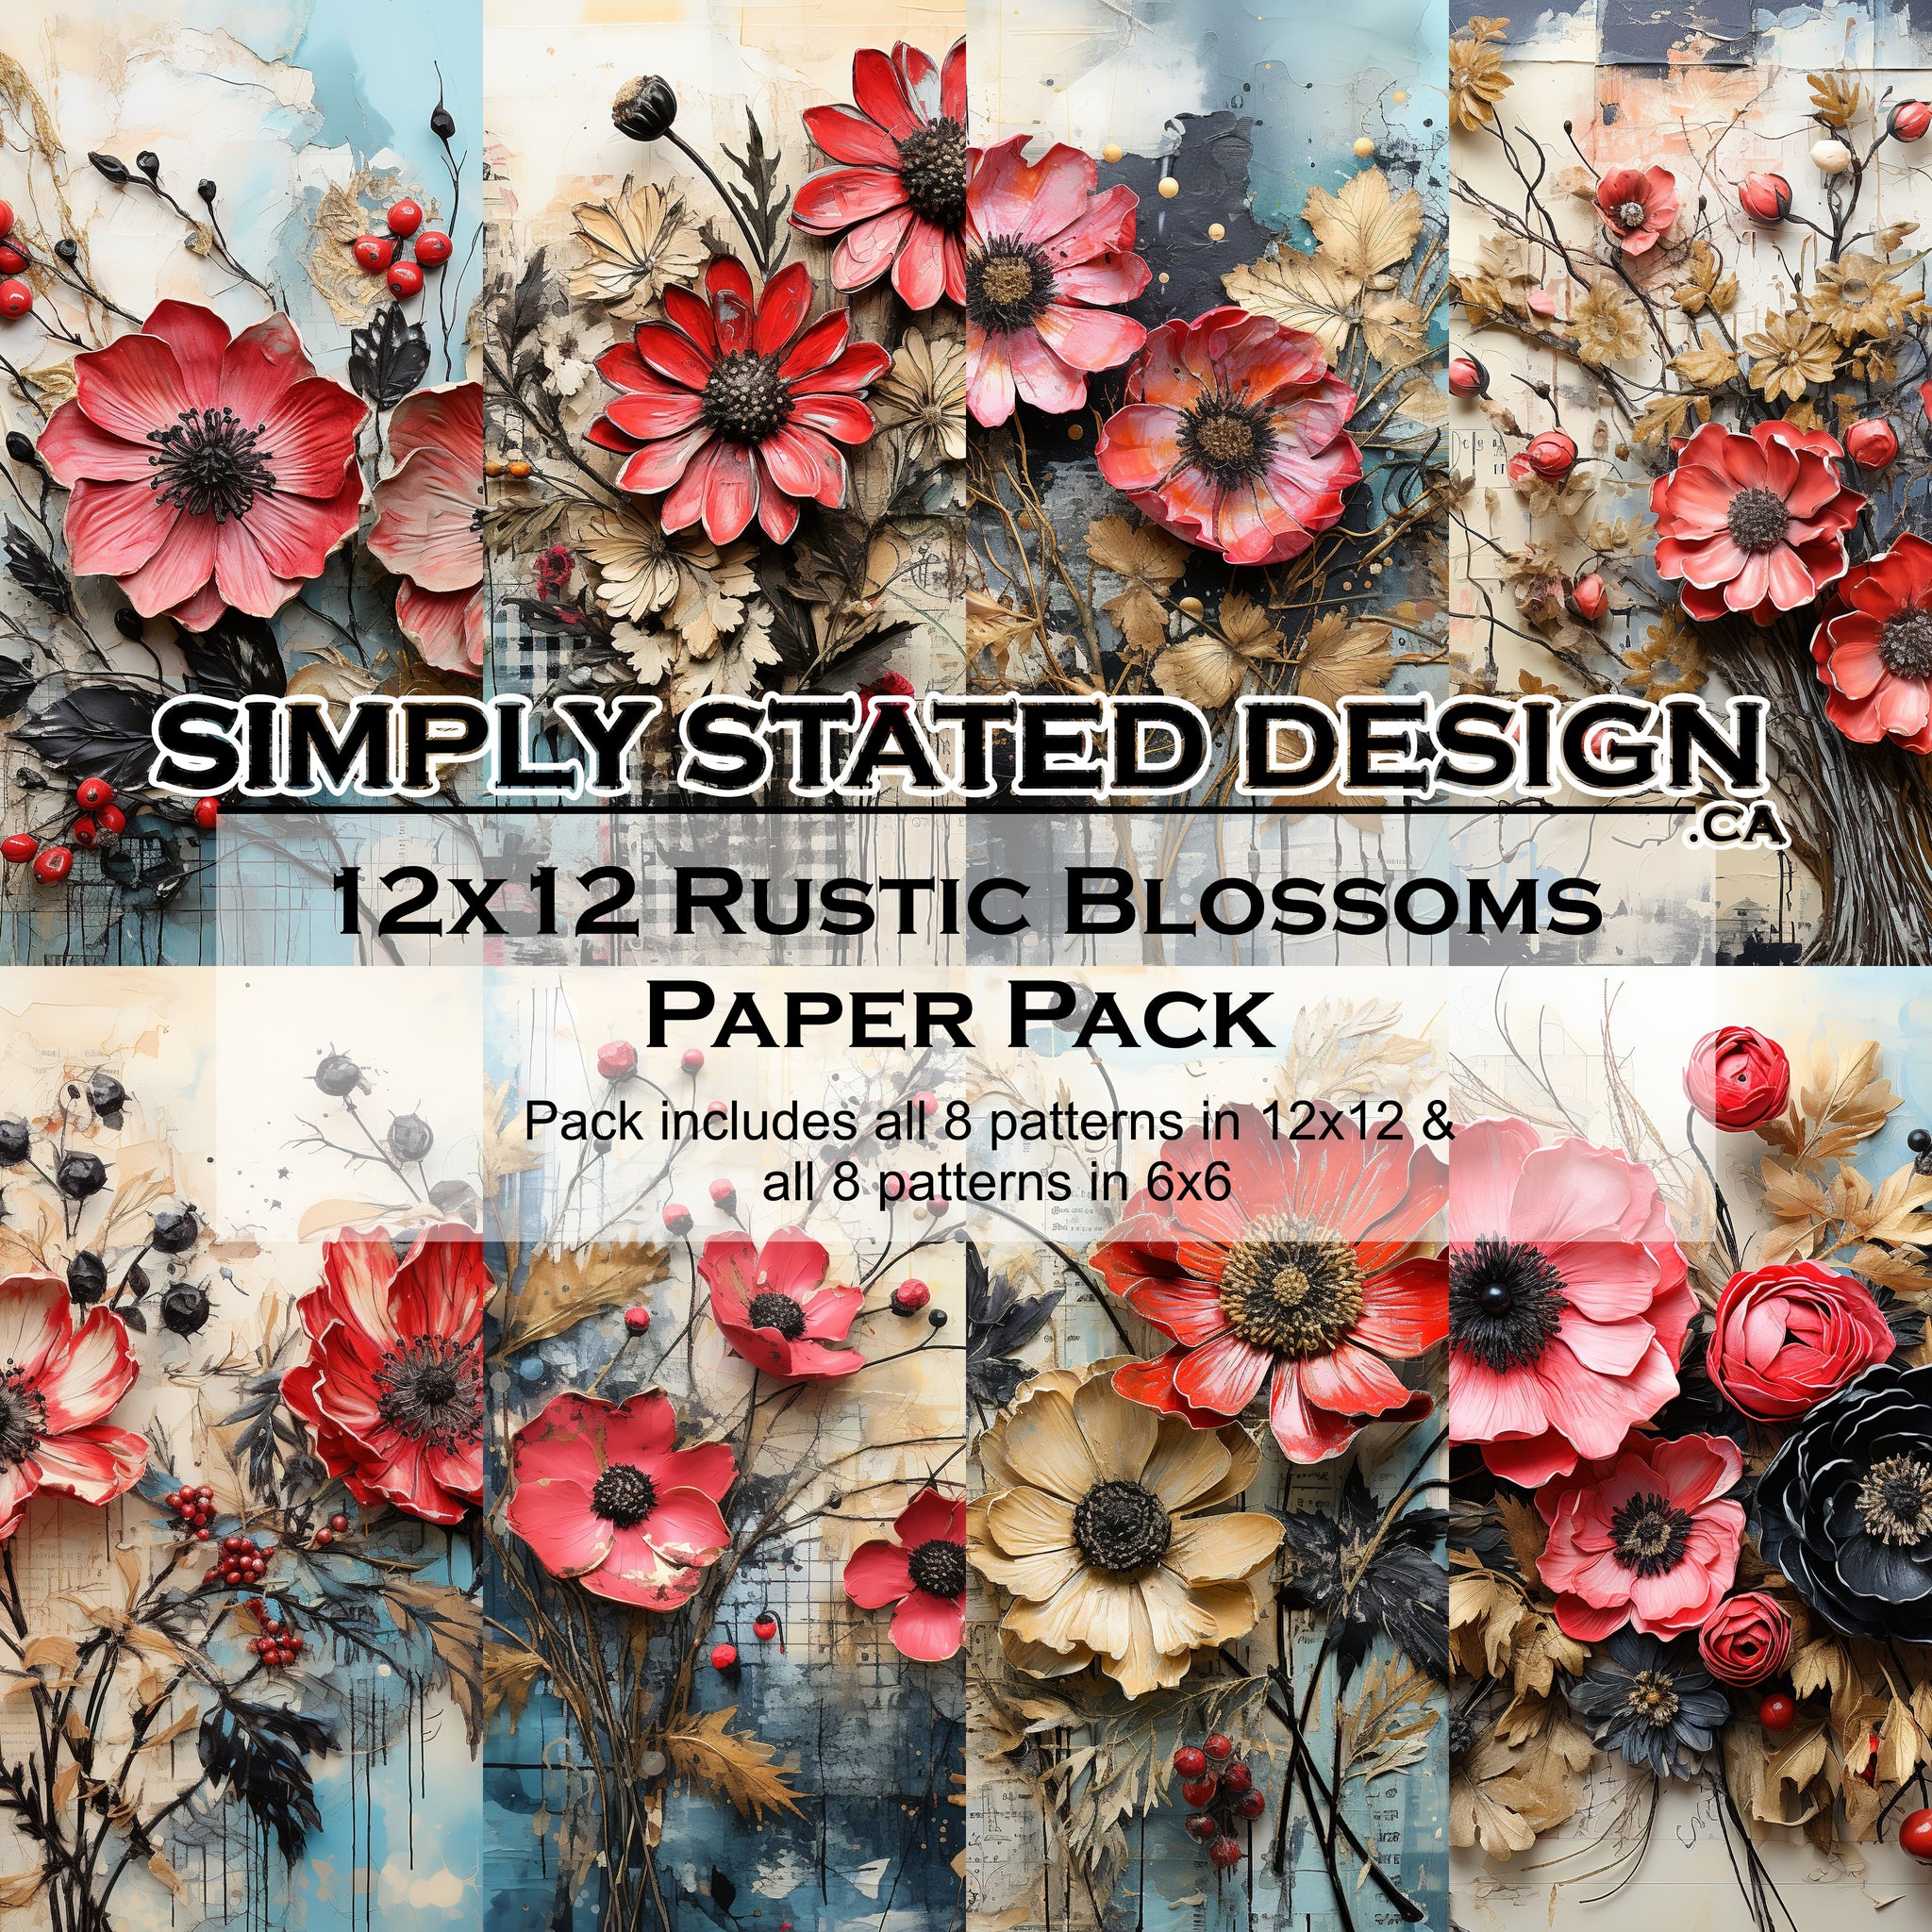 Rustic Blossoms 12x12 Paper Pack